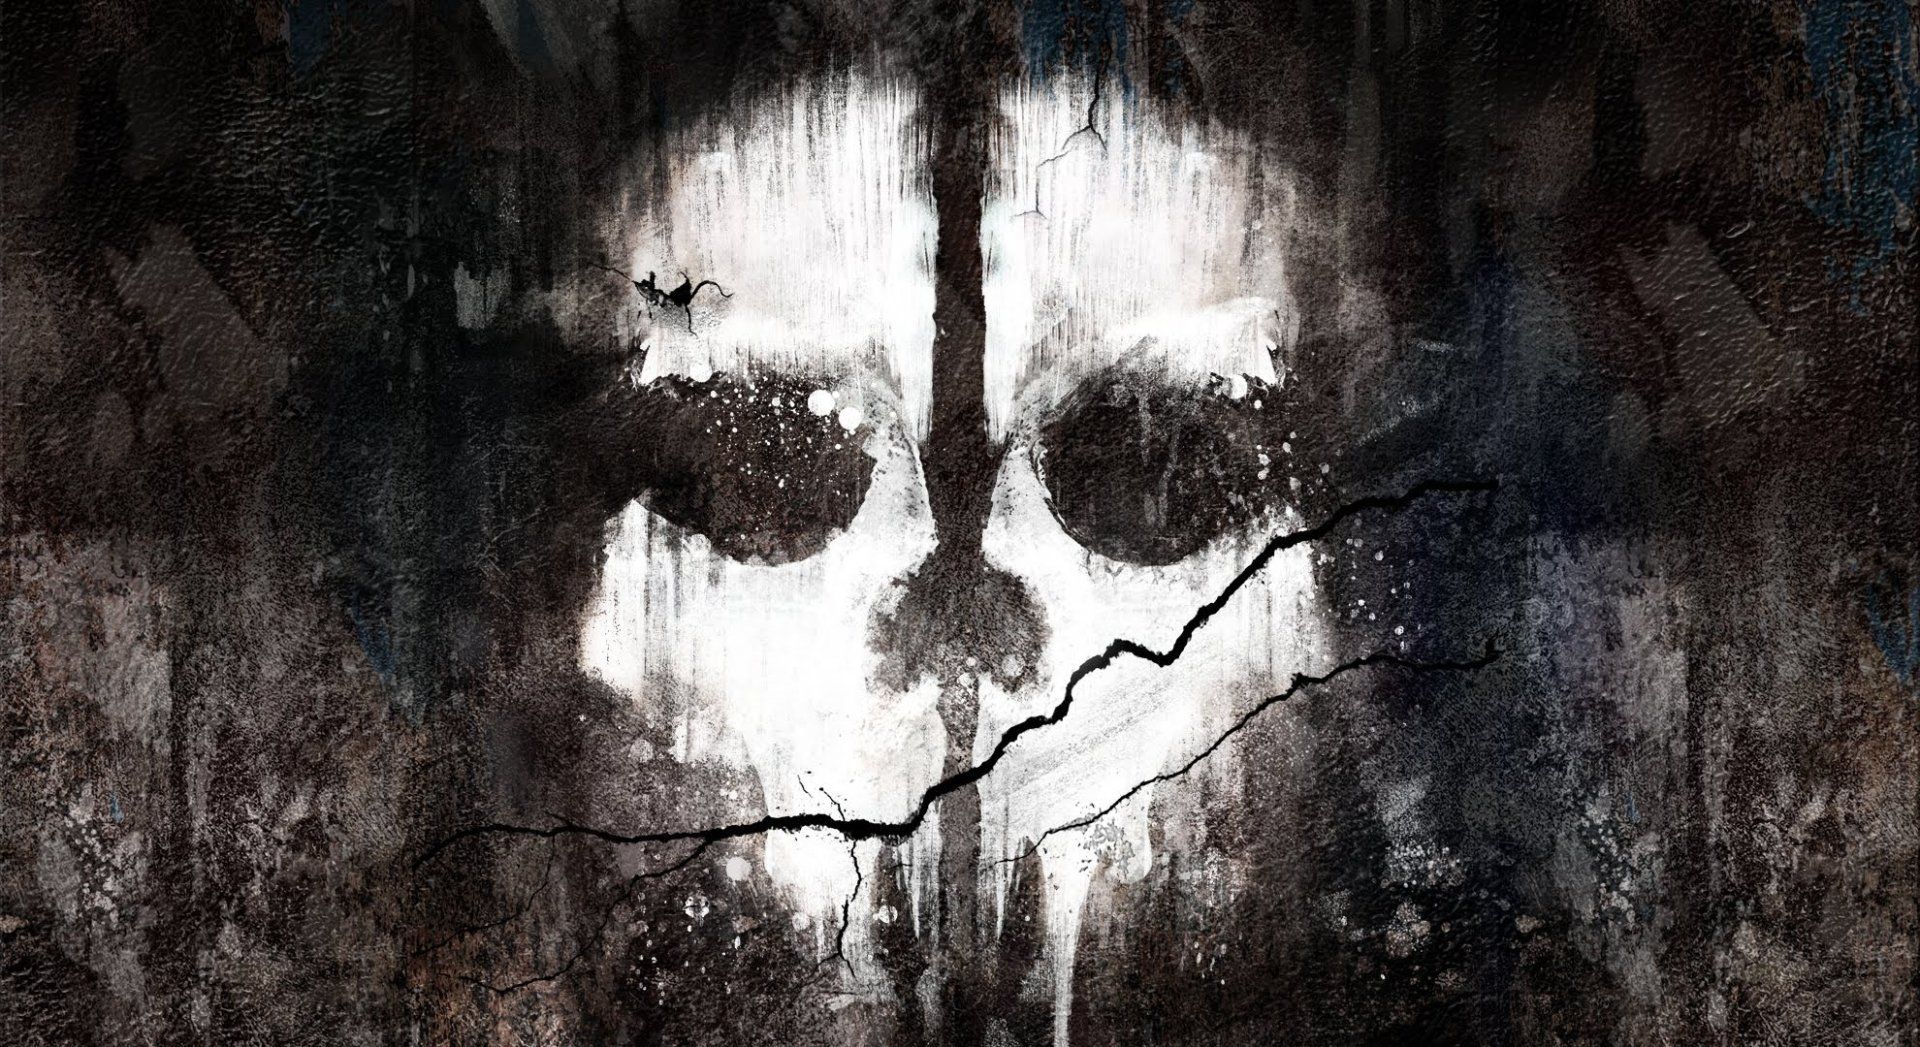 COD Ghost Wallpaper Free COD Ghost Background